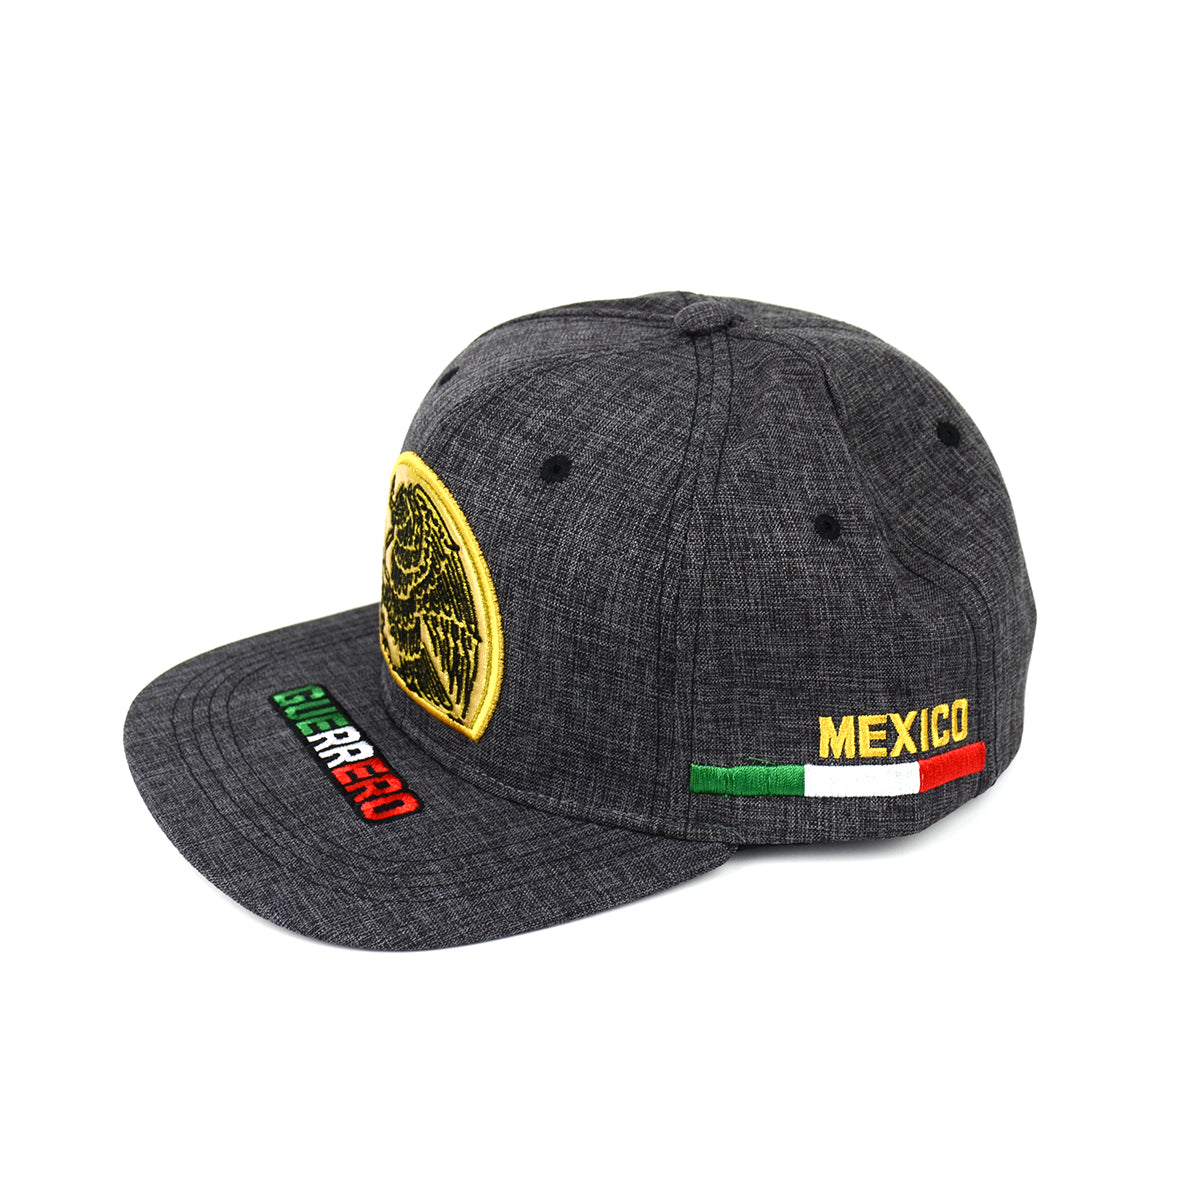 Snapback "Guerrero Mexico" Hat Embroidered